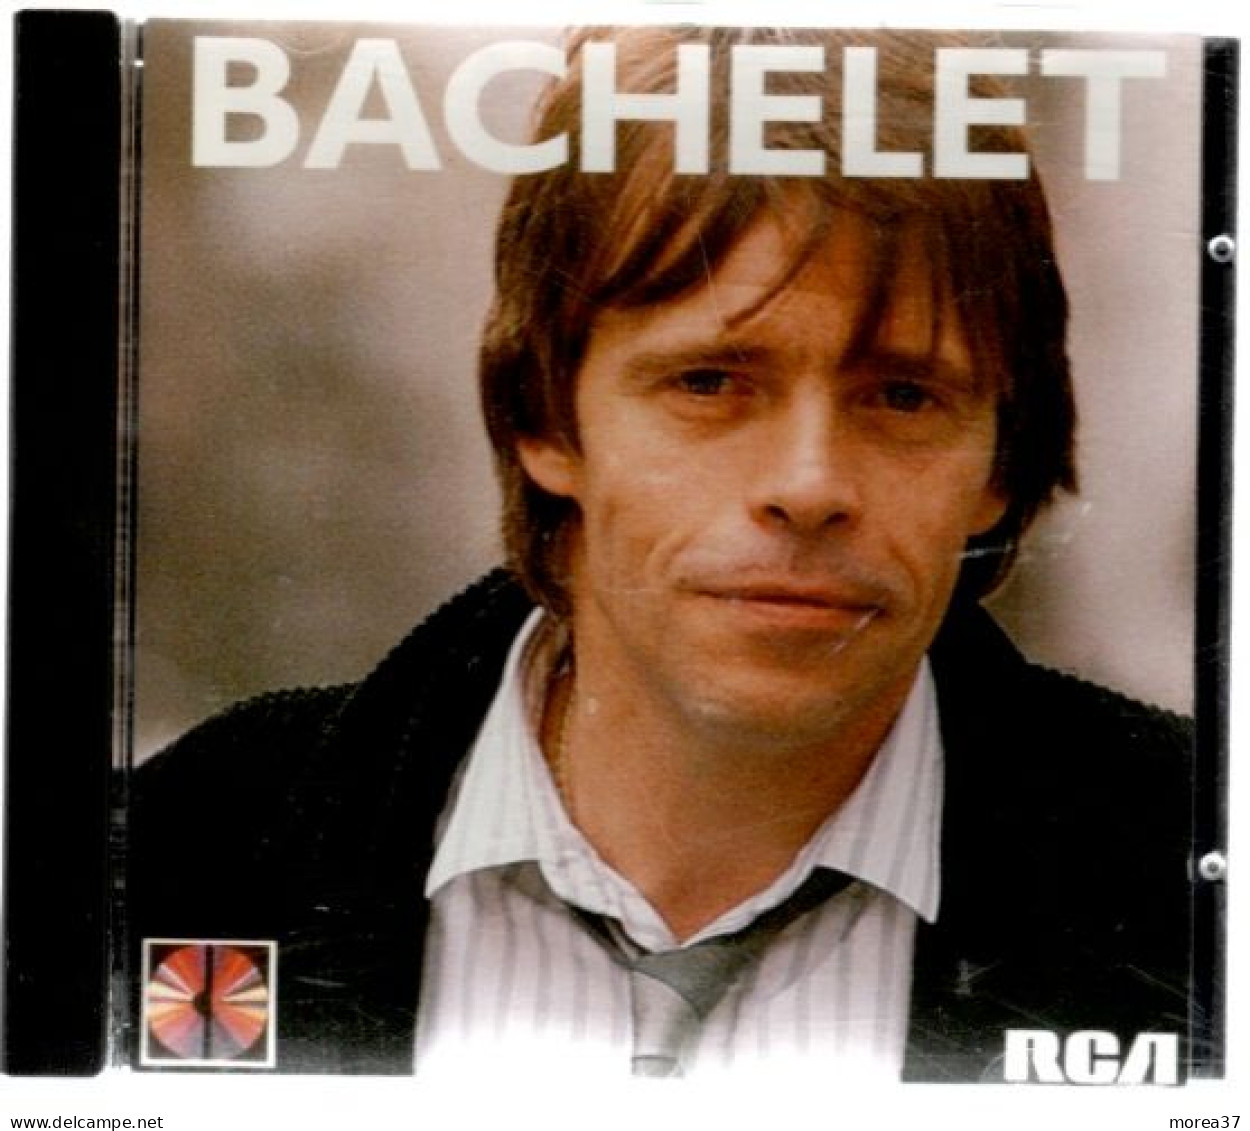 PIERRE BACHELET      (REF CD 2) - Other - French Music